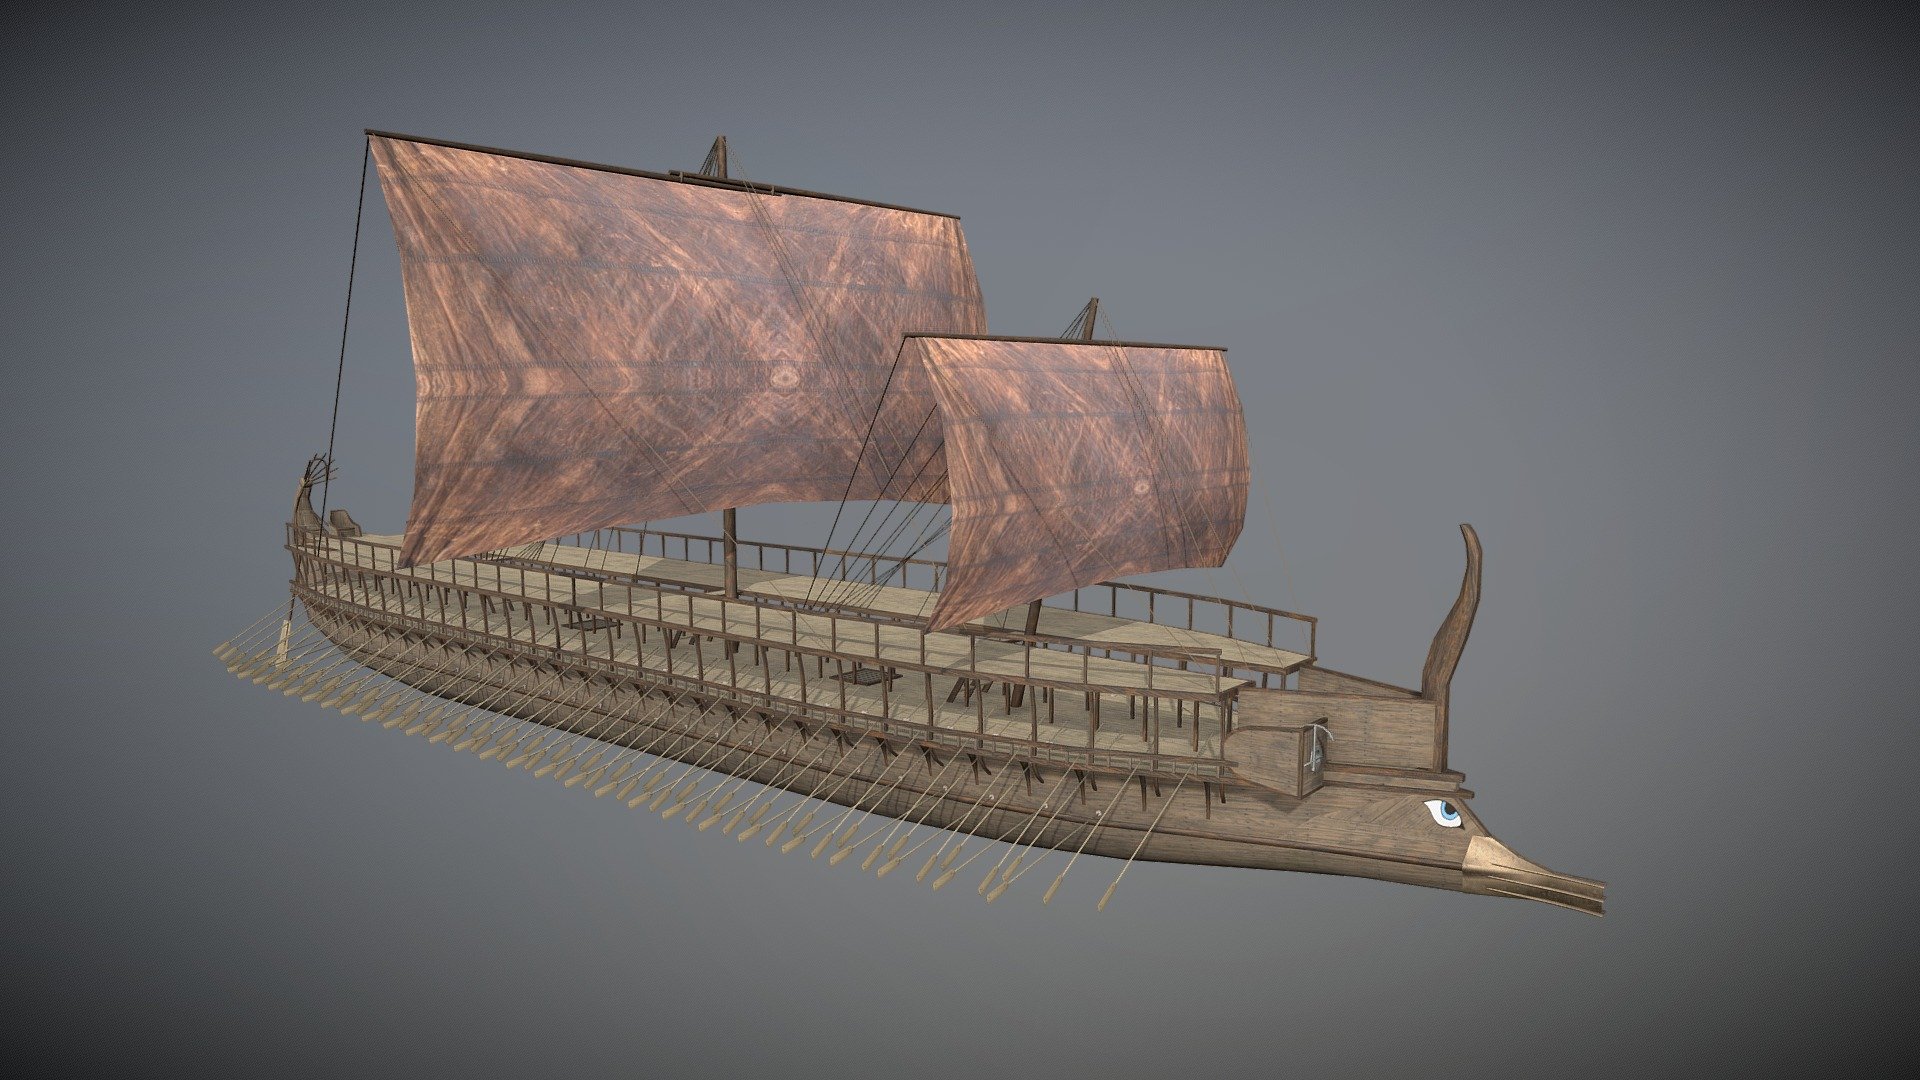 The trireme was an ancient galley used by the ancient maritime civilizations of the Mediterranean in numerous wars. The trireme derives its name from its three rows of oars, each manned by one man for a total of 170 oarsmen 3d model